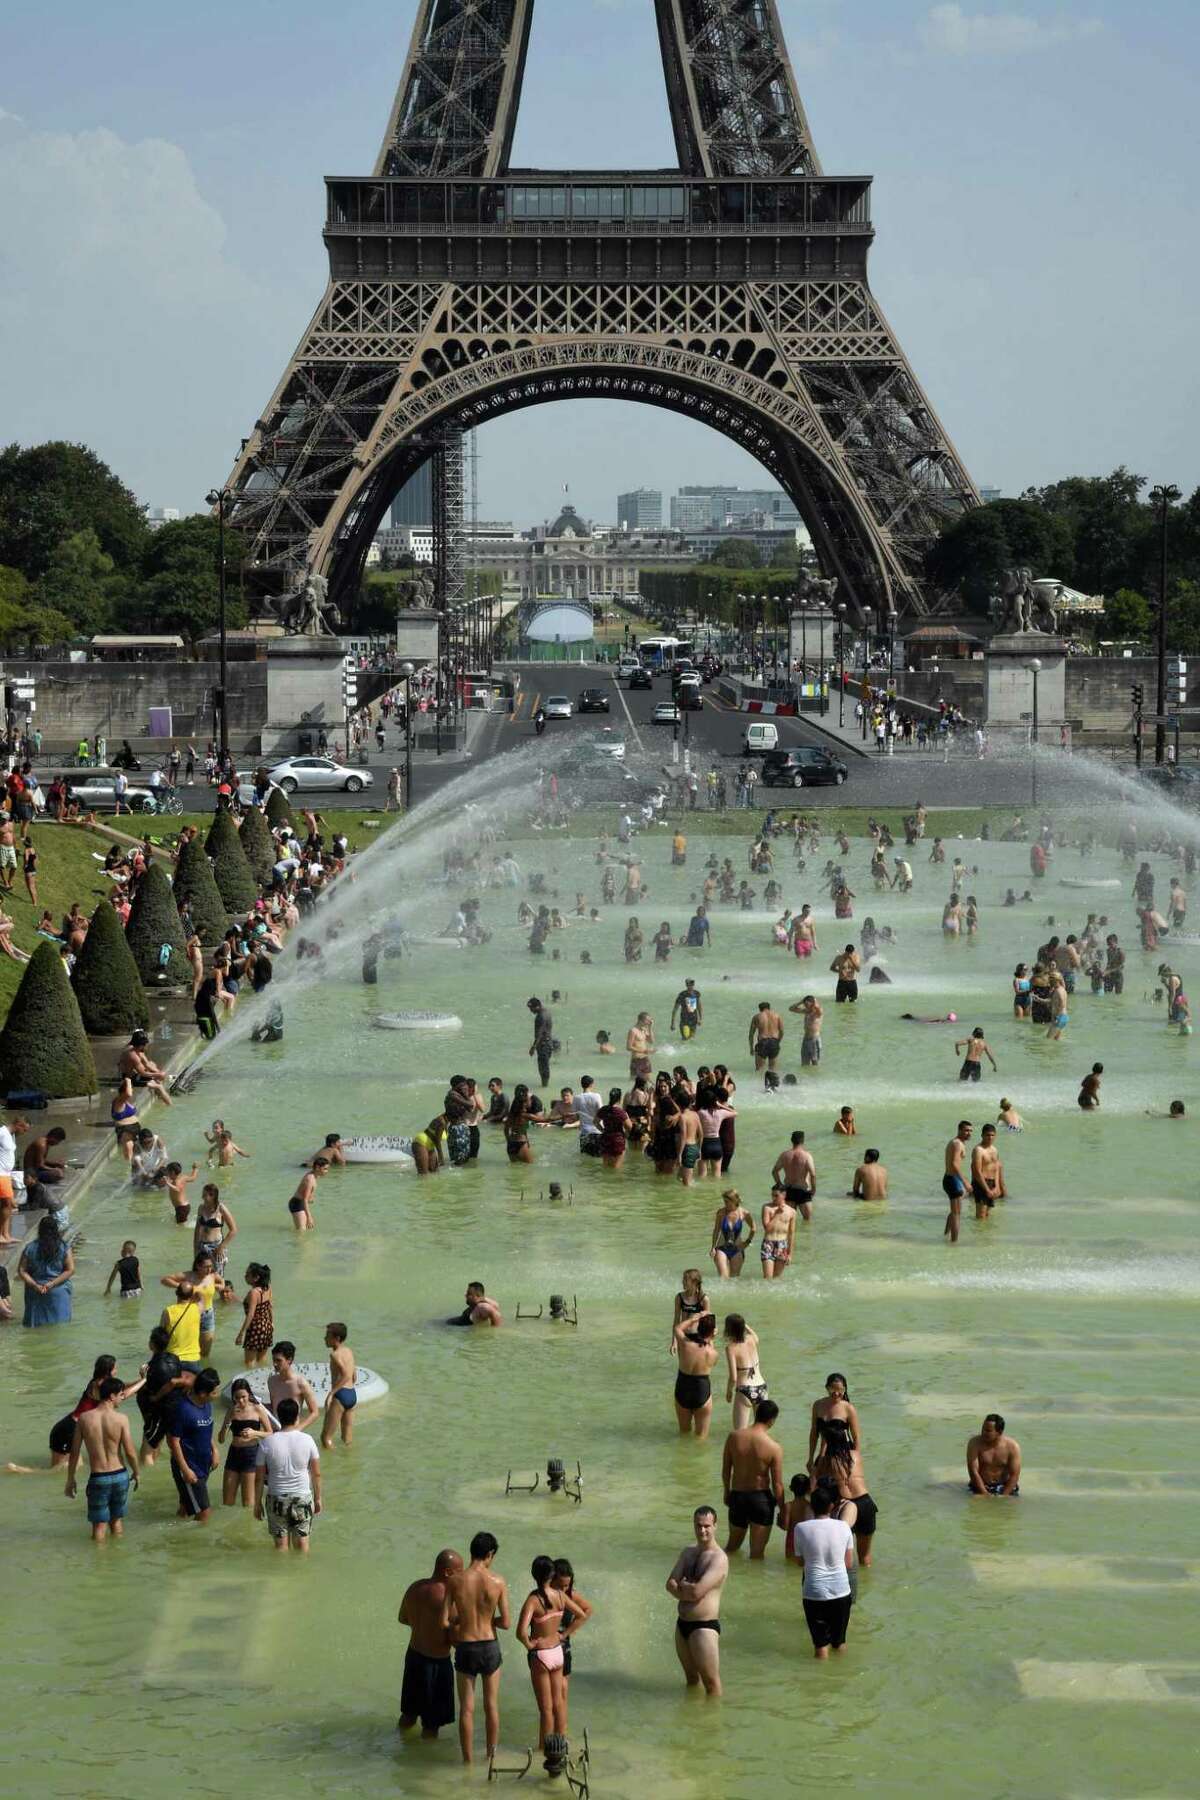 People cool off at the Trocadero Fountains next to the Eiffel Tower in Paris, on July 25, 2019 as a new heatwave hits the French capital. All-time temperature records were smashed in Belgium, Germany and the Netherlands on July 24.